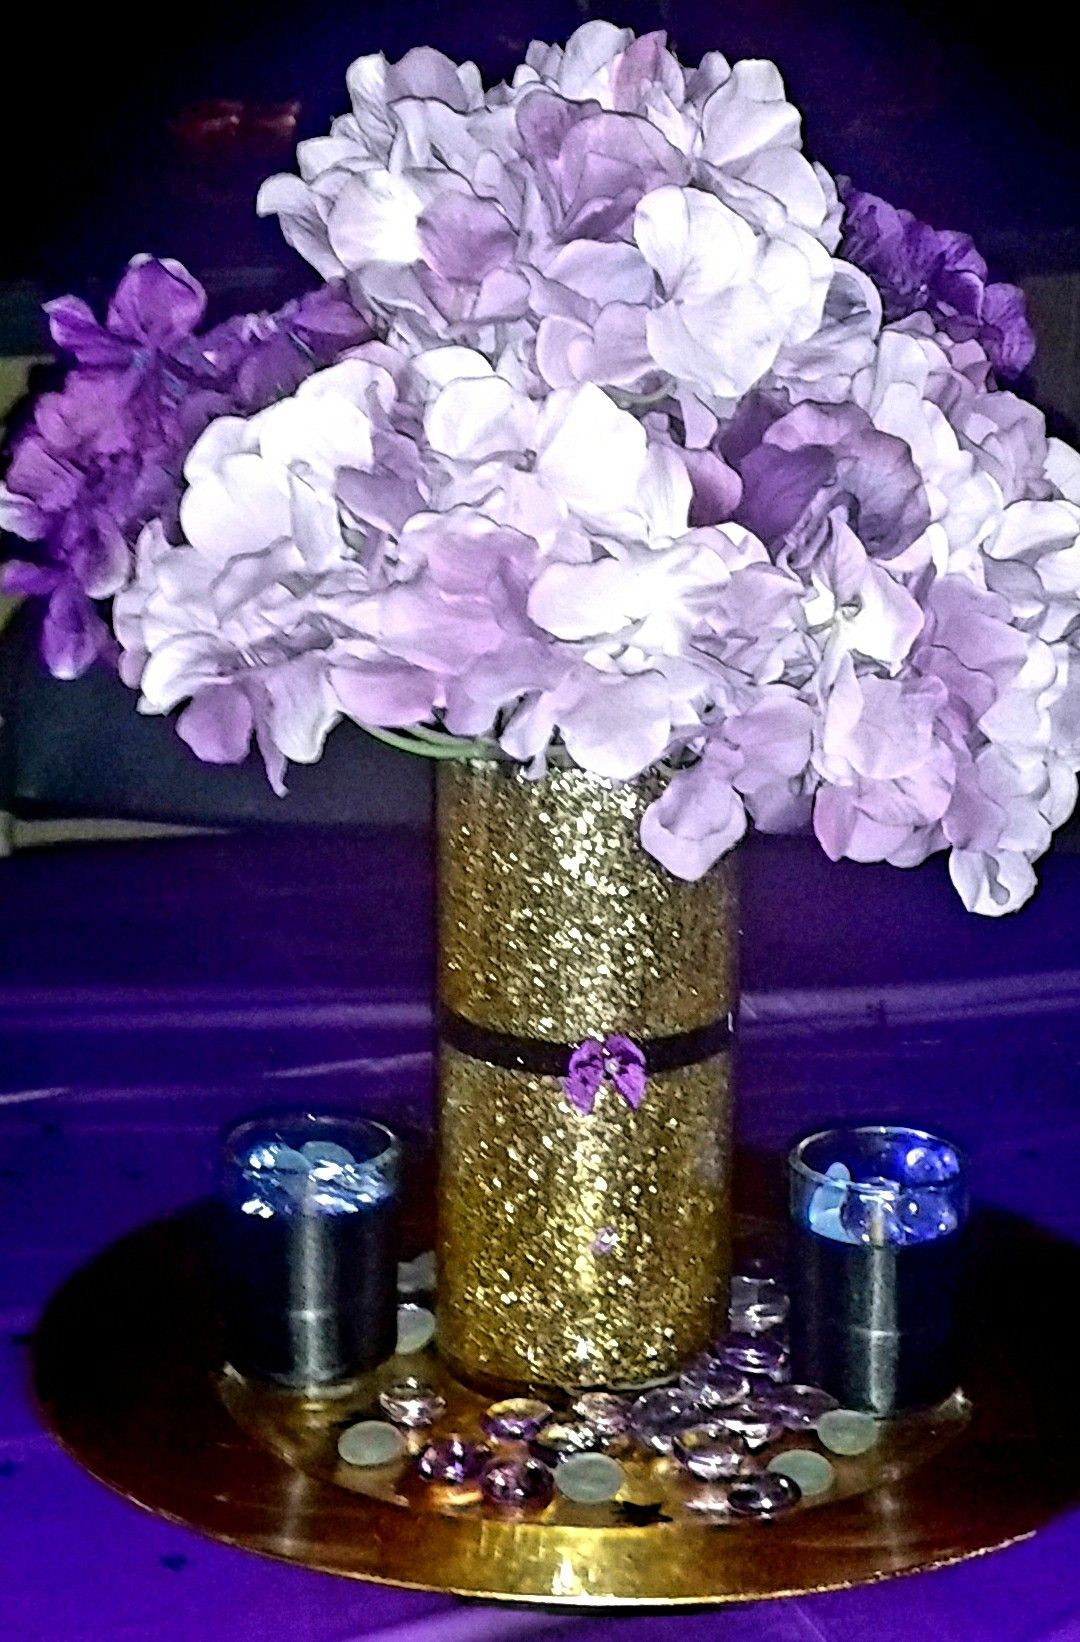 24 Stylish Pedestal Flower Vase 2024 free download pedestal flower vase of vase floral gold centerpiece picturesque www picturesboss com throughout beautiful gold glitter vase with purple hydrangeas centerpiece perfect for any occasion jpg 1